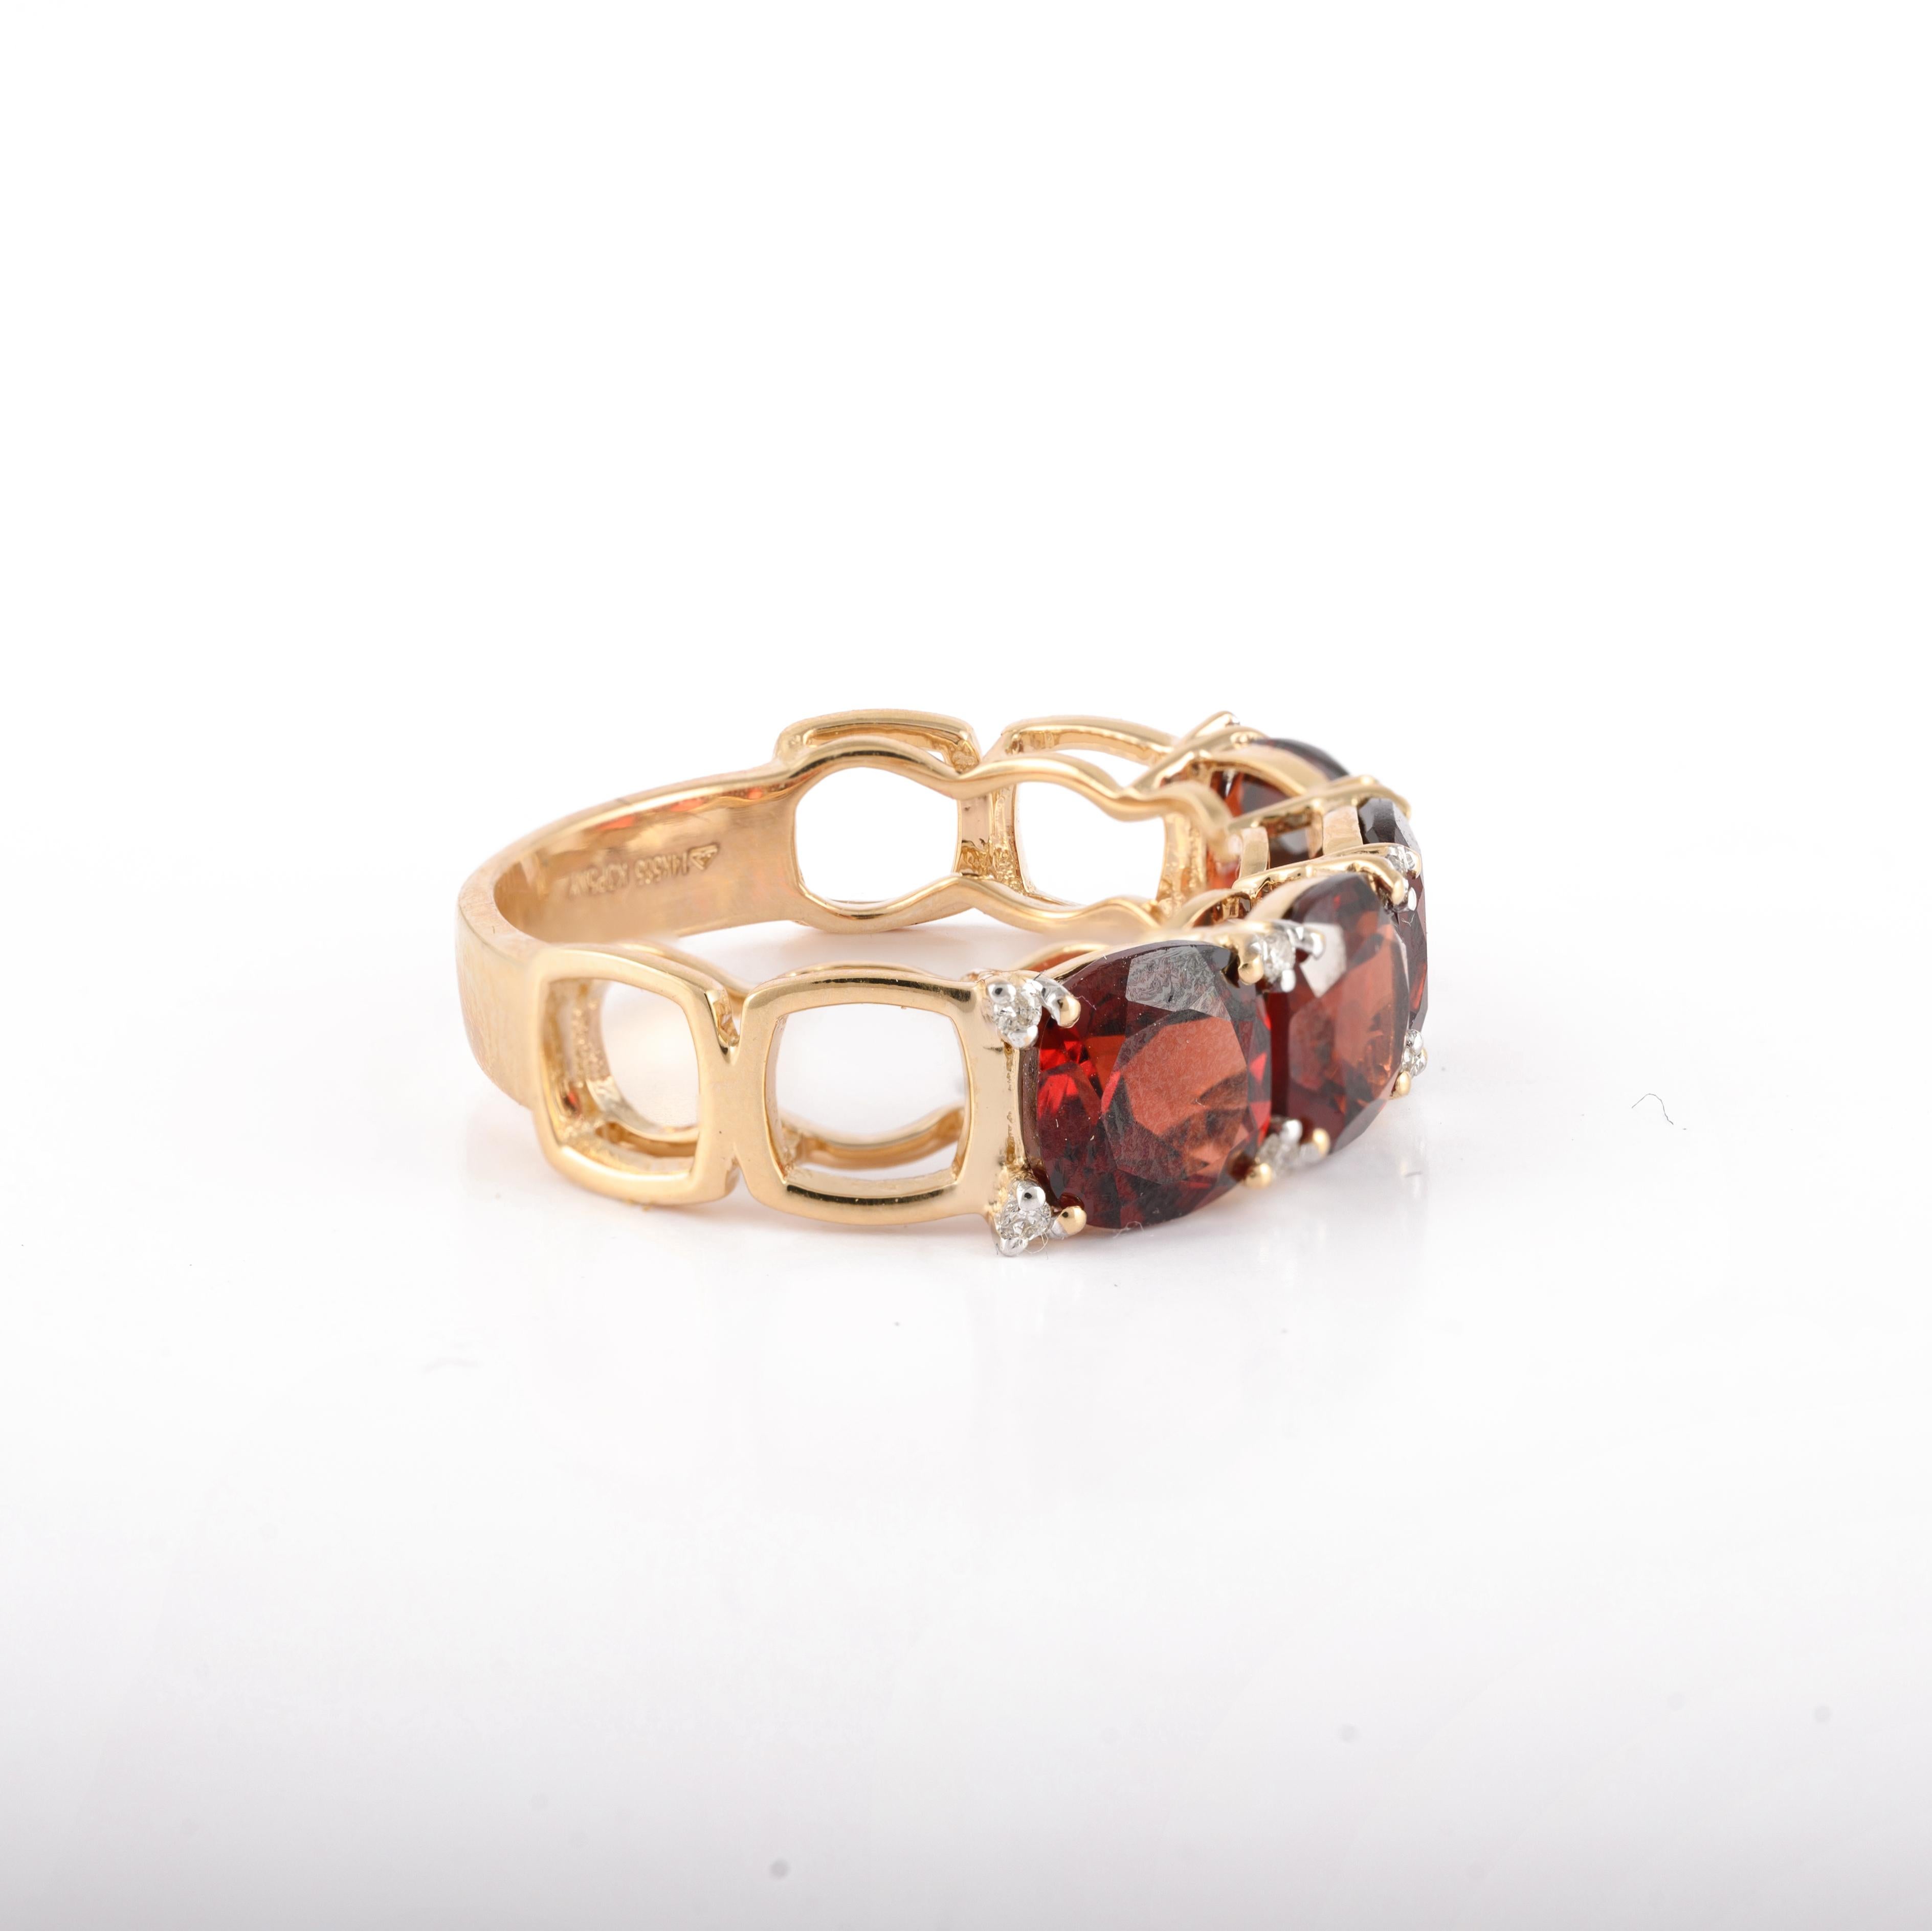 For Sale:  14k Solid Yellow Gold Natural 4.75 Carat Garnet Ring with Diamonds for Her 6